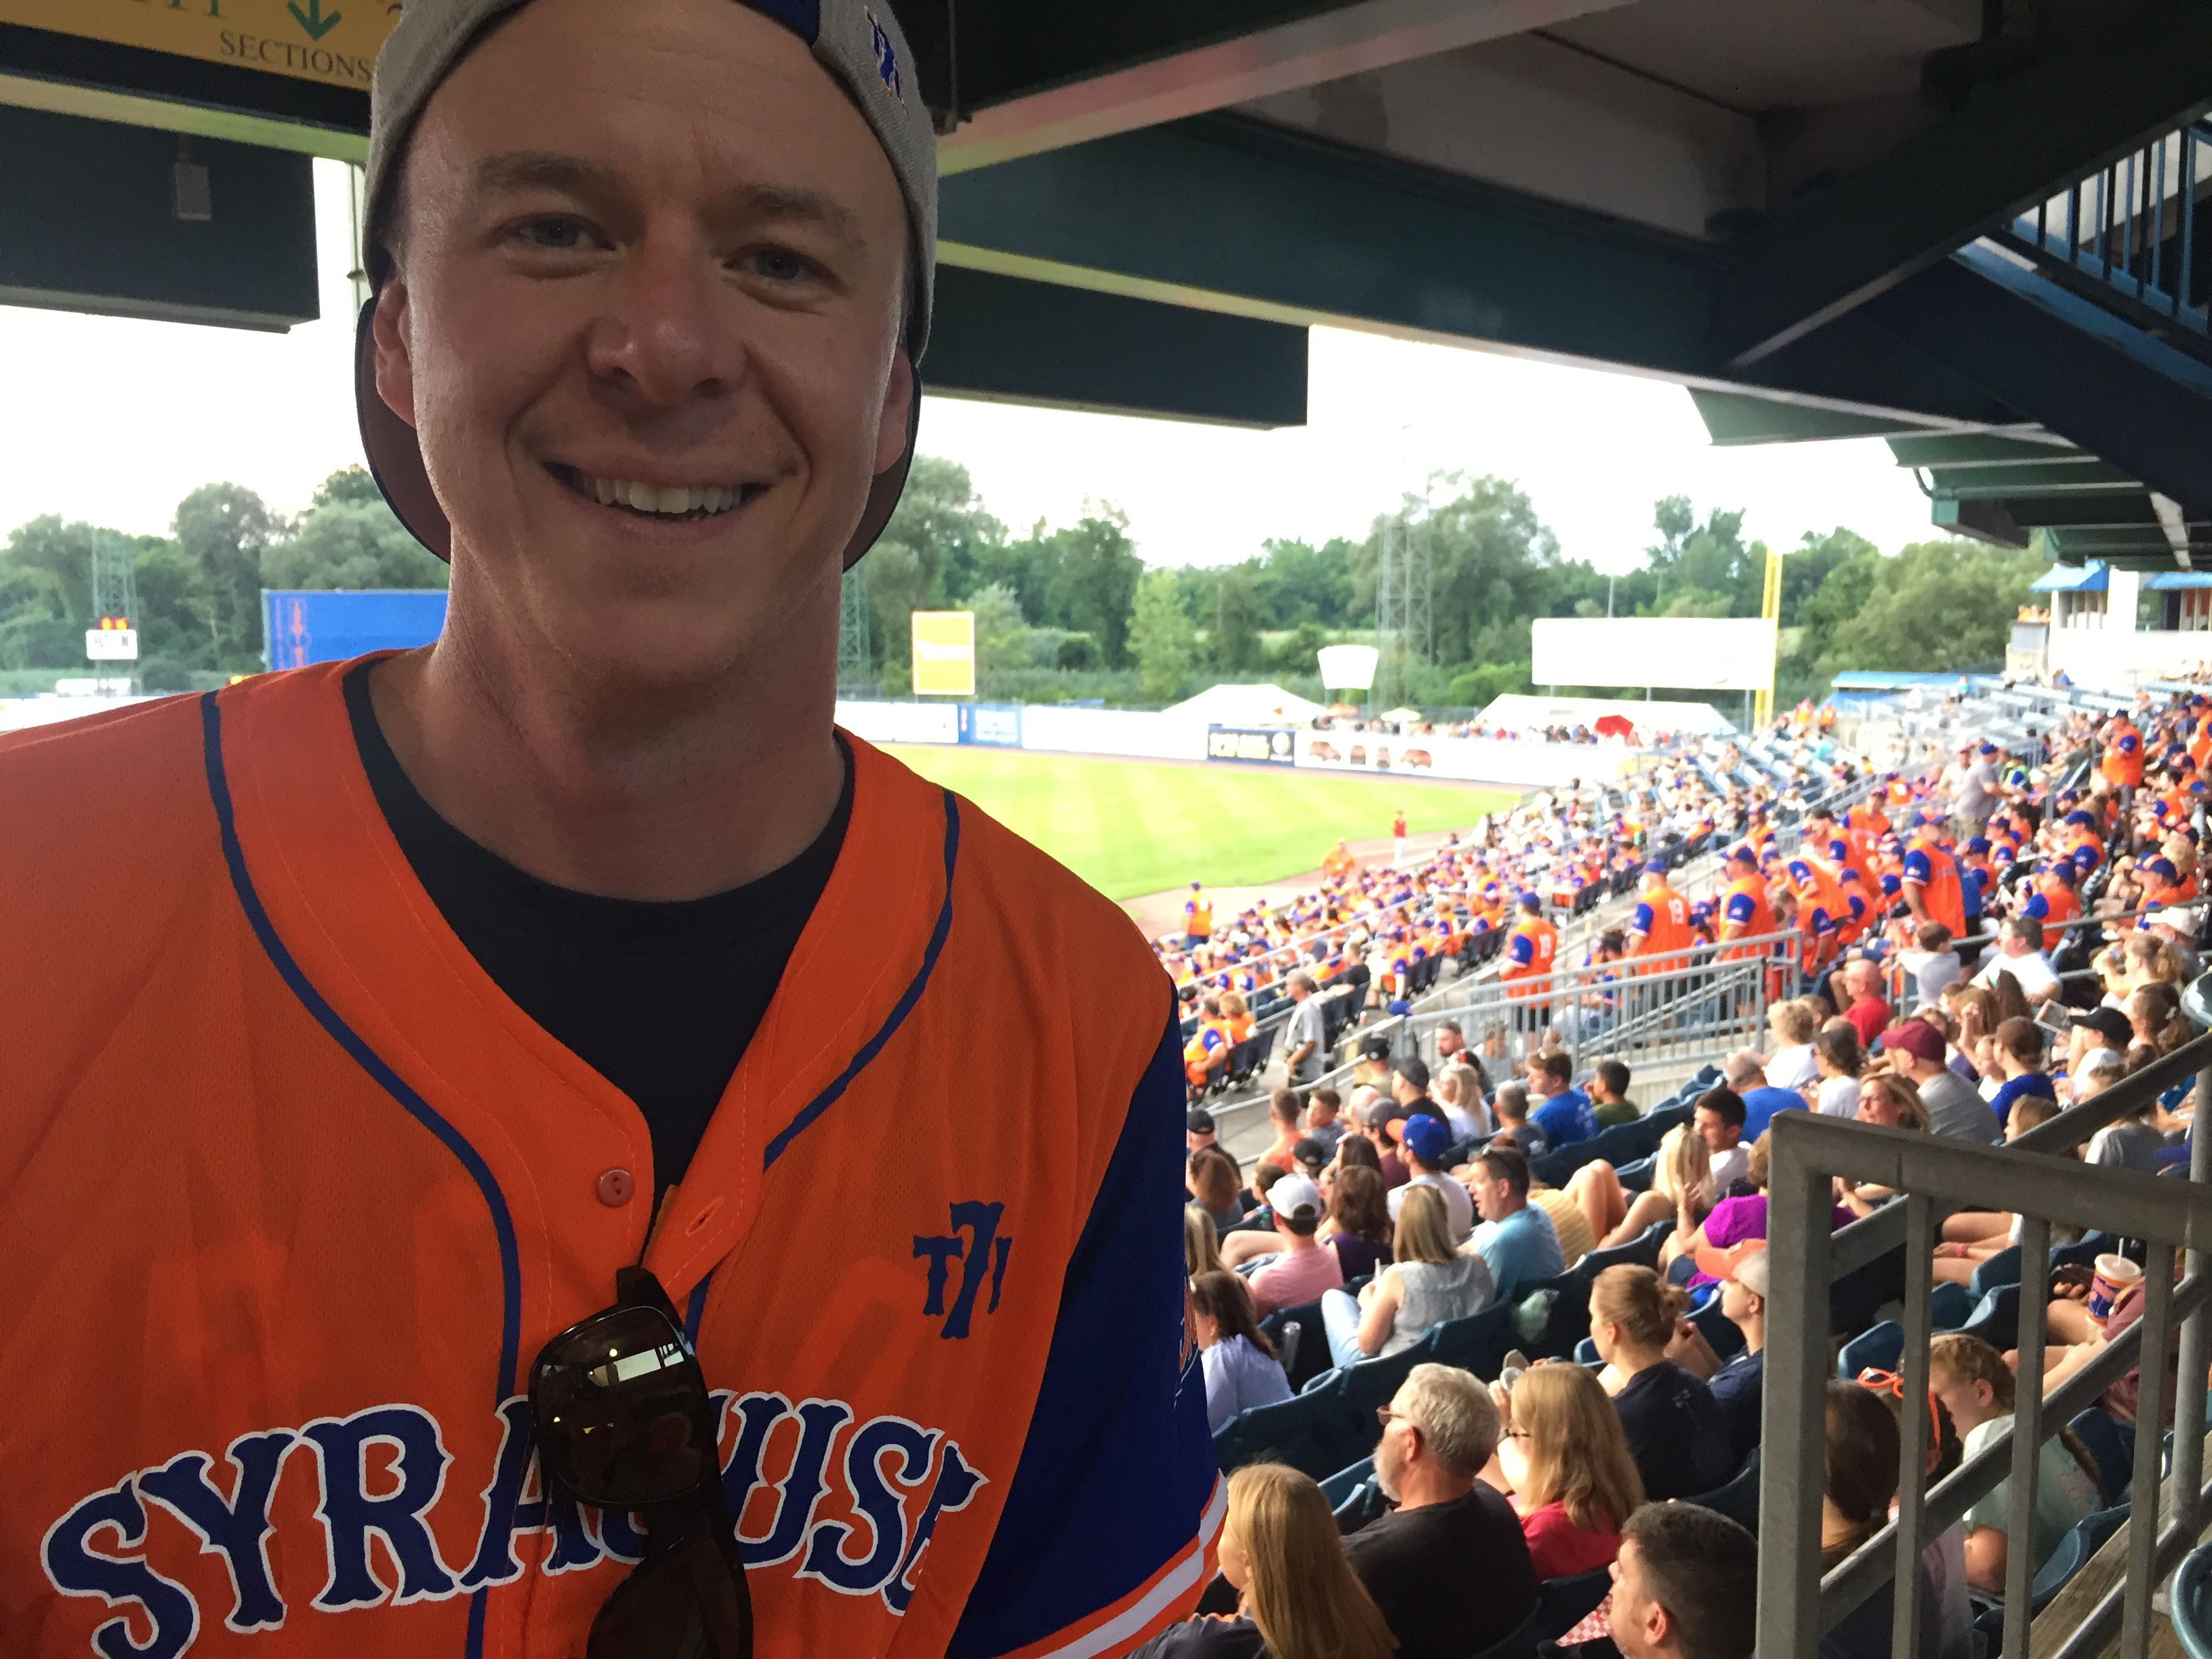 New York Mets' 7 Line Army announces date of 2020 Syracuse visit